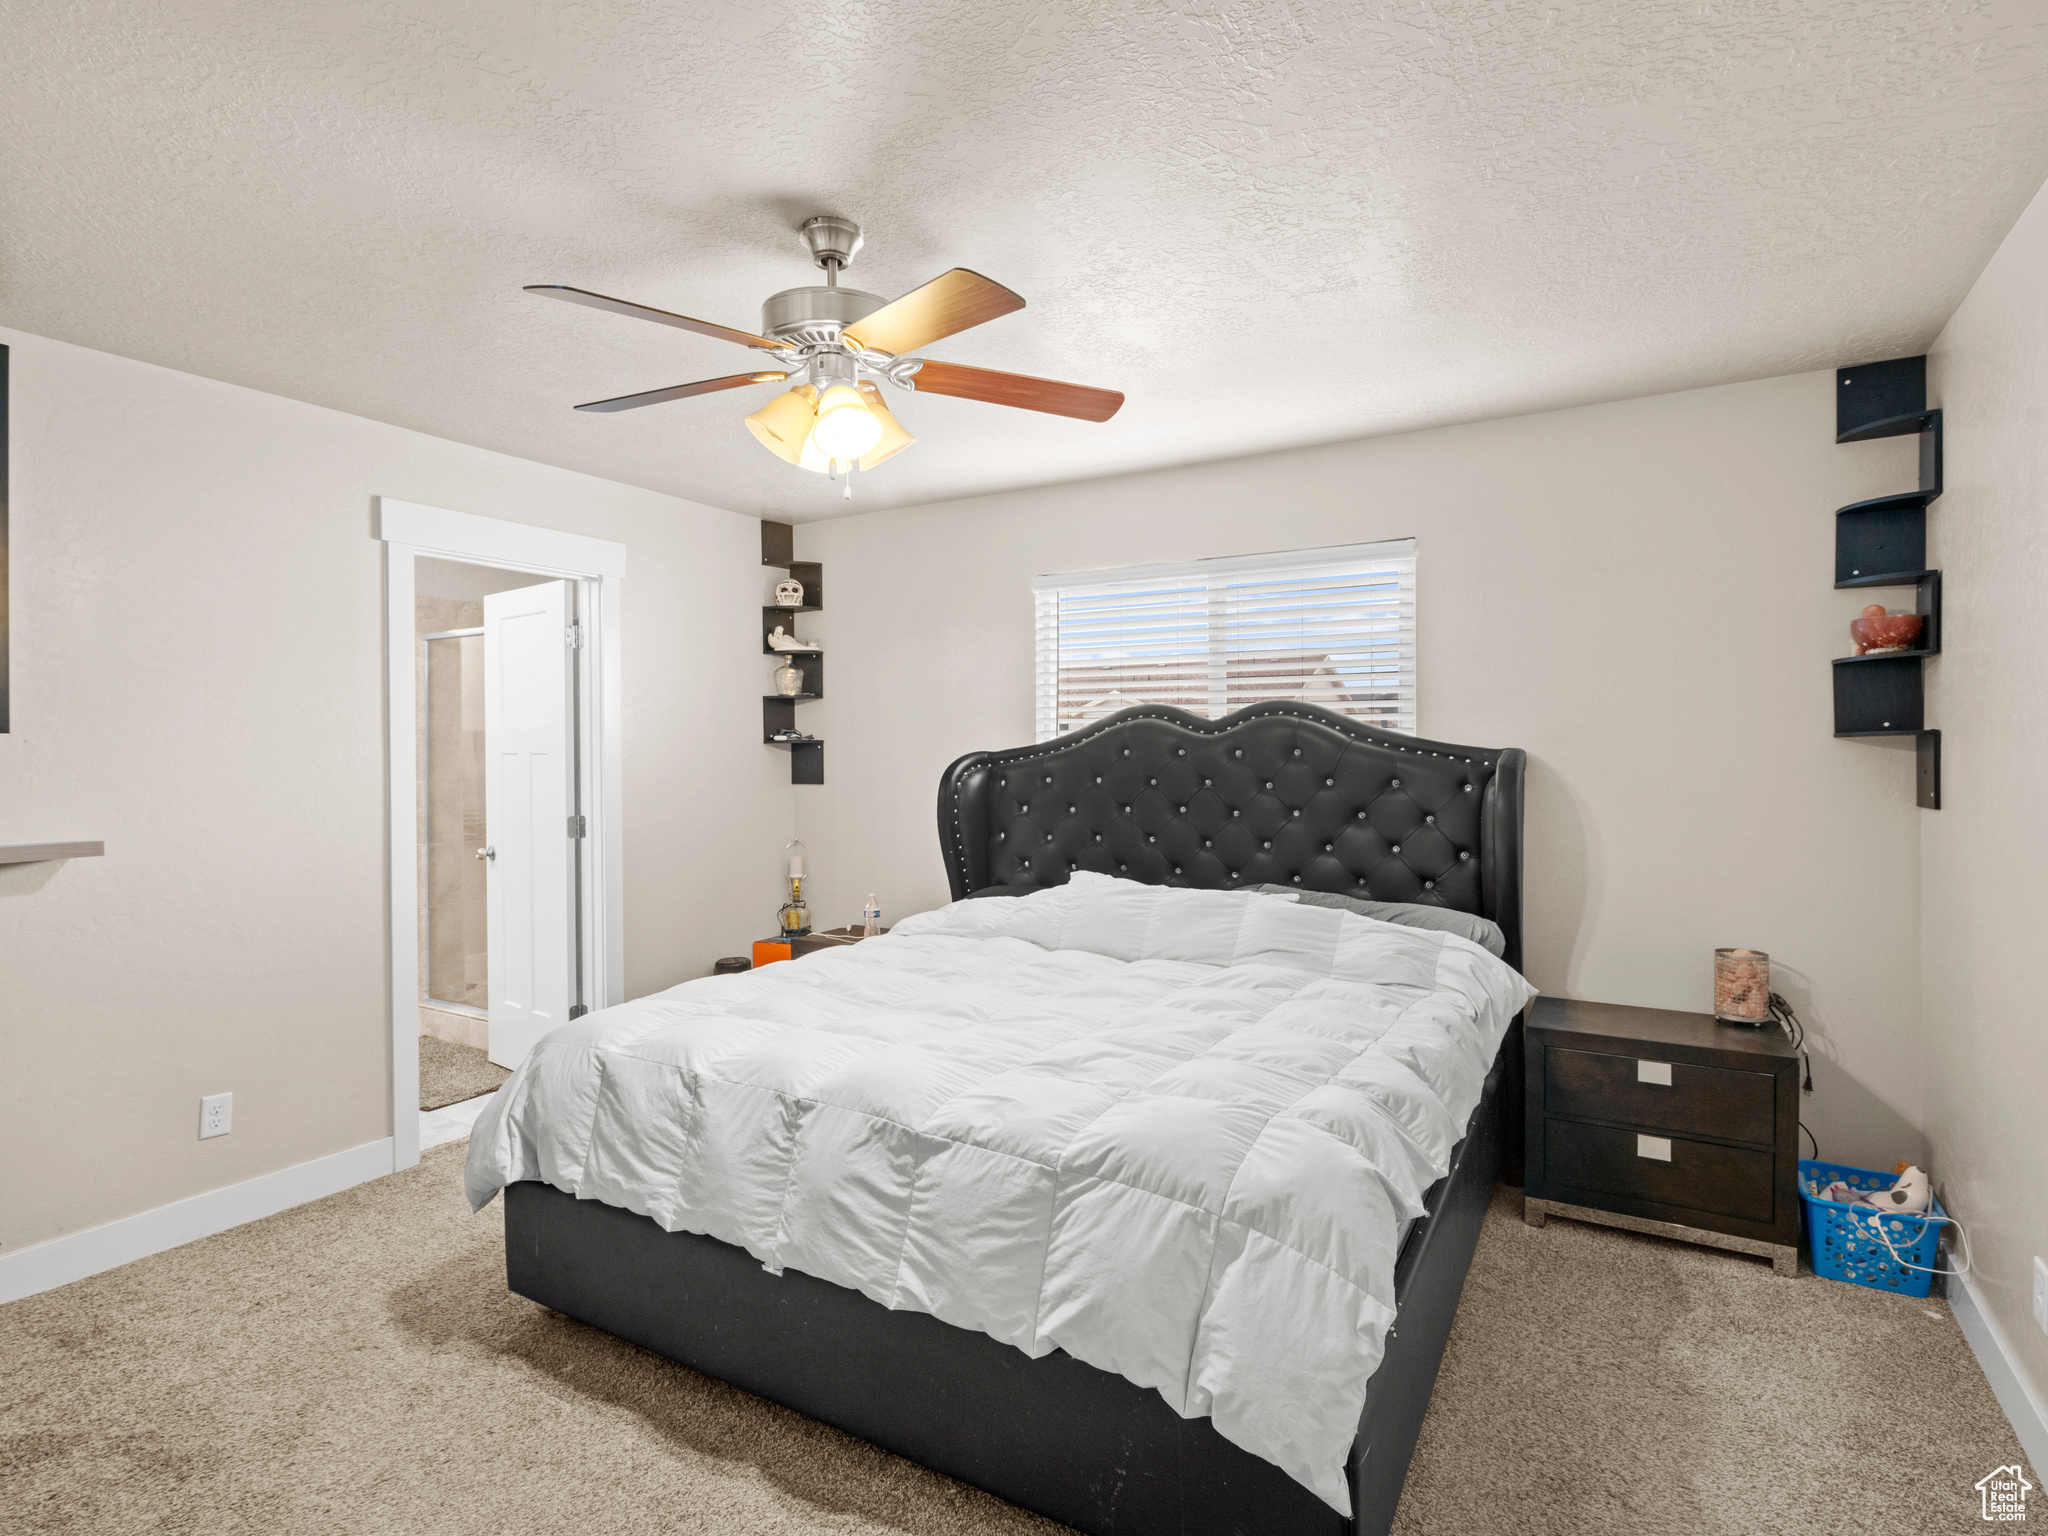 Carpeted bedroom featuring ceiling fan, a textured ceiling, and ensuite bathroom